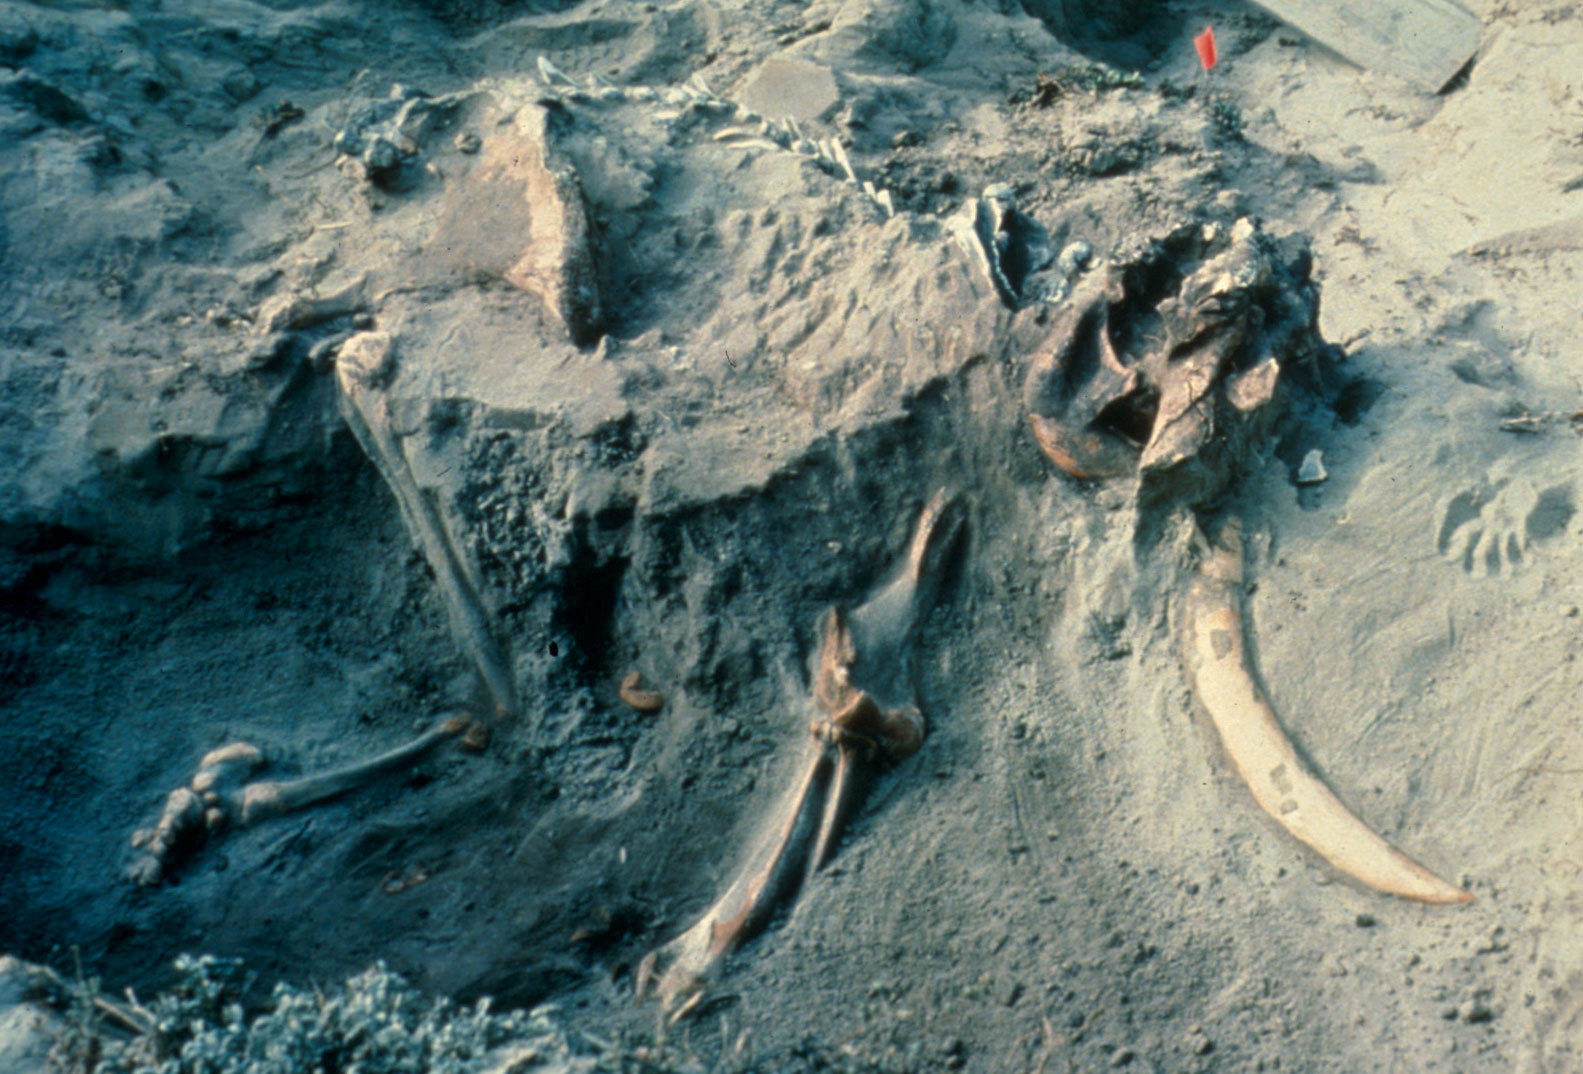 Photograph of a pygmy mammoth skeleton preserved in a sand dune. The backbone, the skull with one tusk, and a front and a rear leg can be seen. Bones appear to be articulated (in life position).